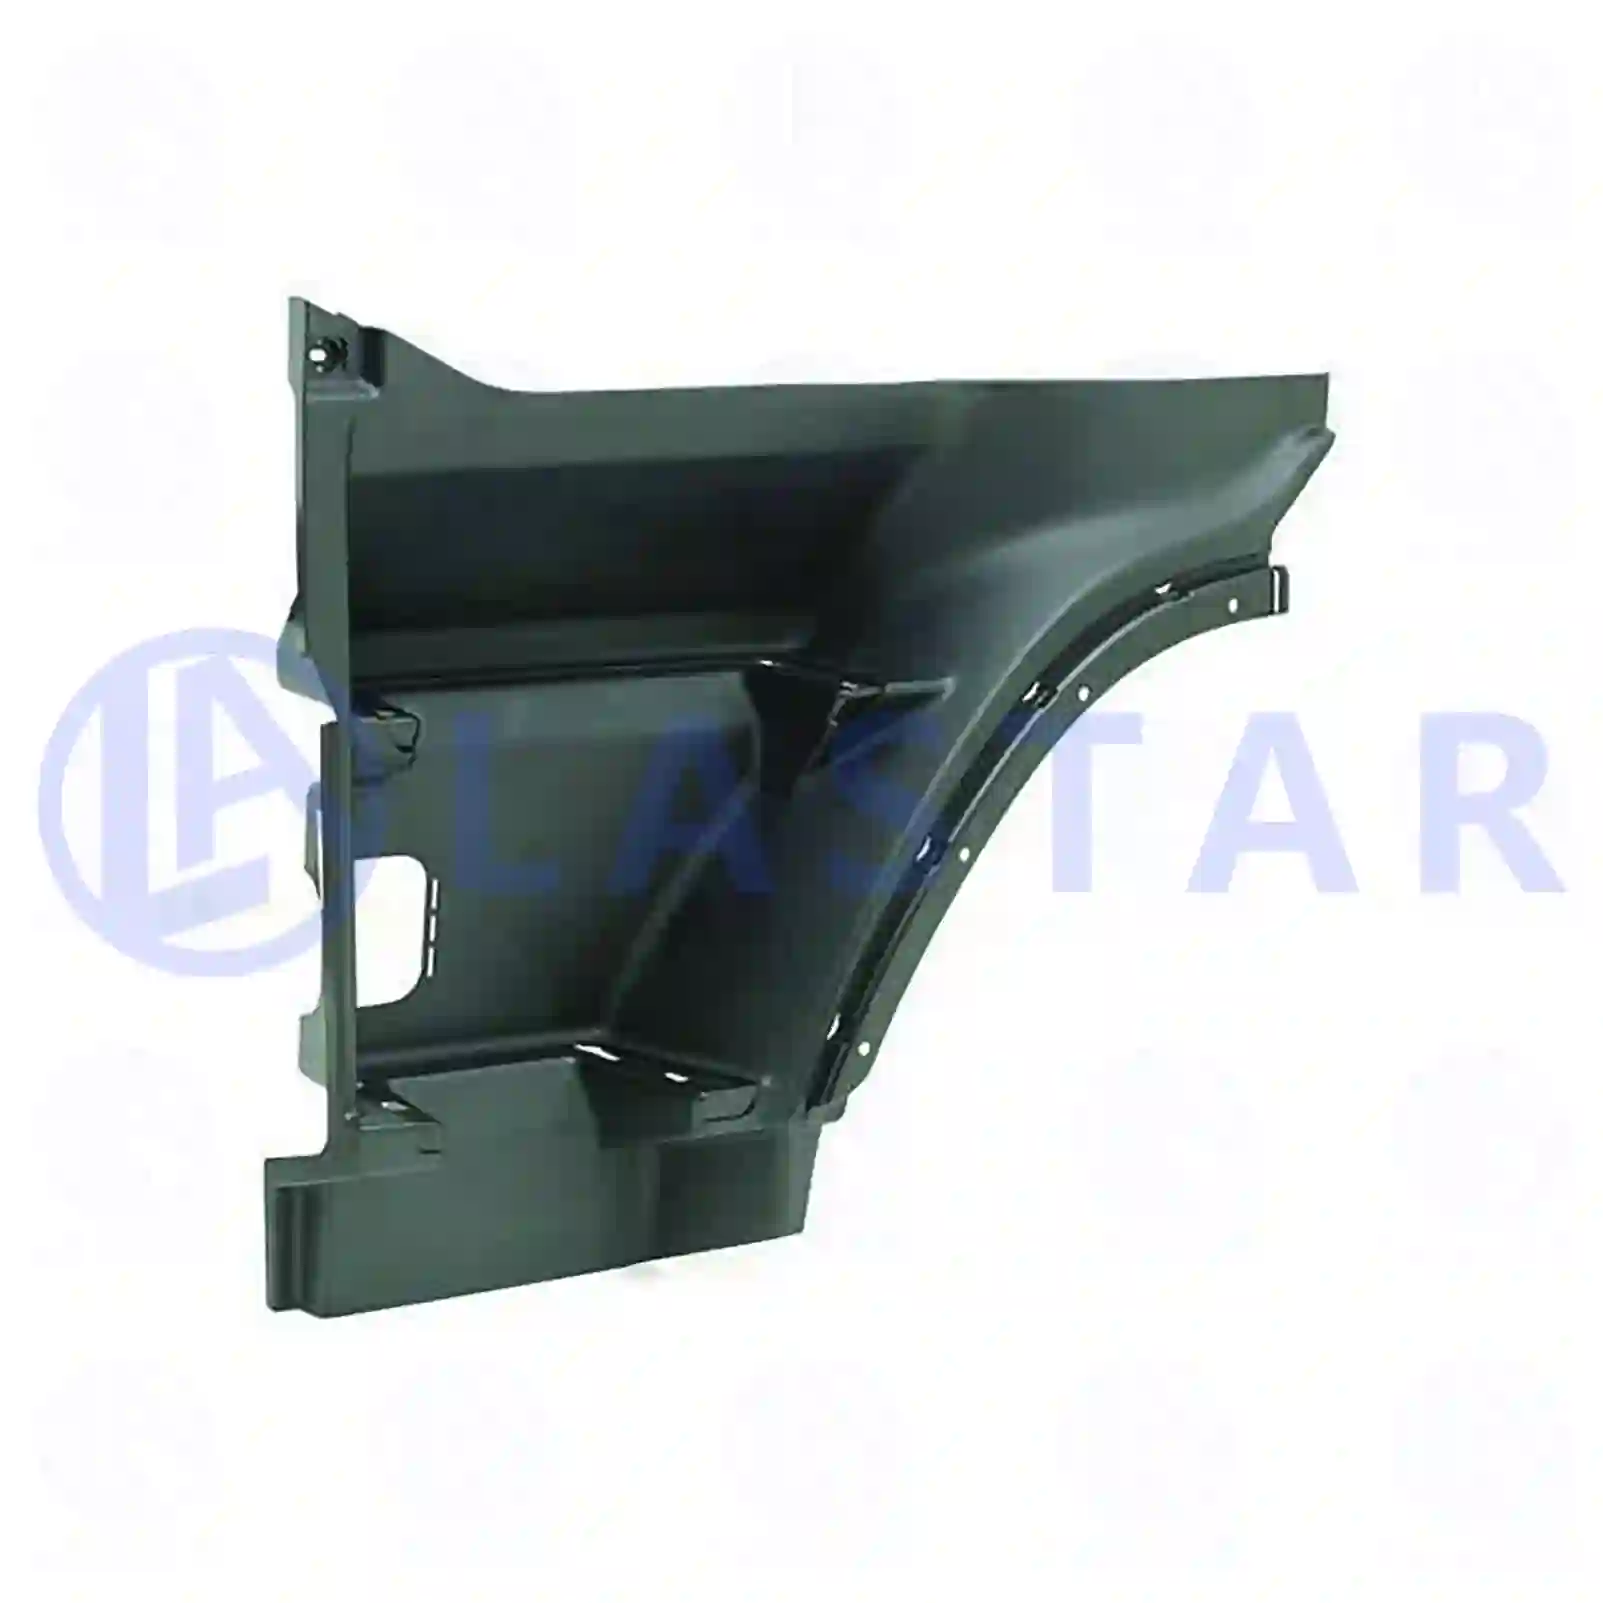 Step well case, left, 77721093, 3175927, ZG61183-0008 ||  77721093 Lastar Spare Part | Truck Spare Parts, Auotomotive Spare Parts Step well case, left, 77721093, 3175927, ZG61183-0008 ||  77721093 Lastar Spare Part | Truck Spare Parts, Auotomotive Spare Parts